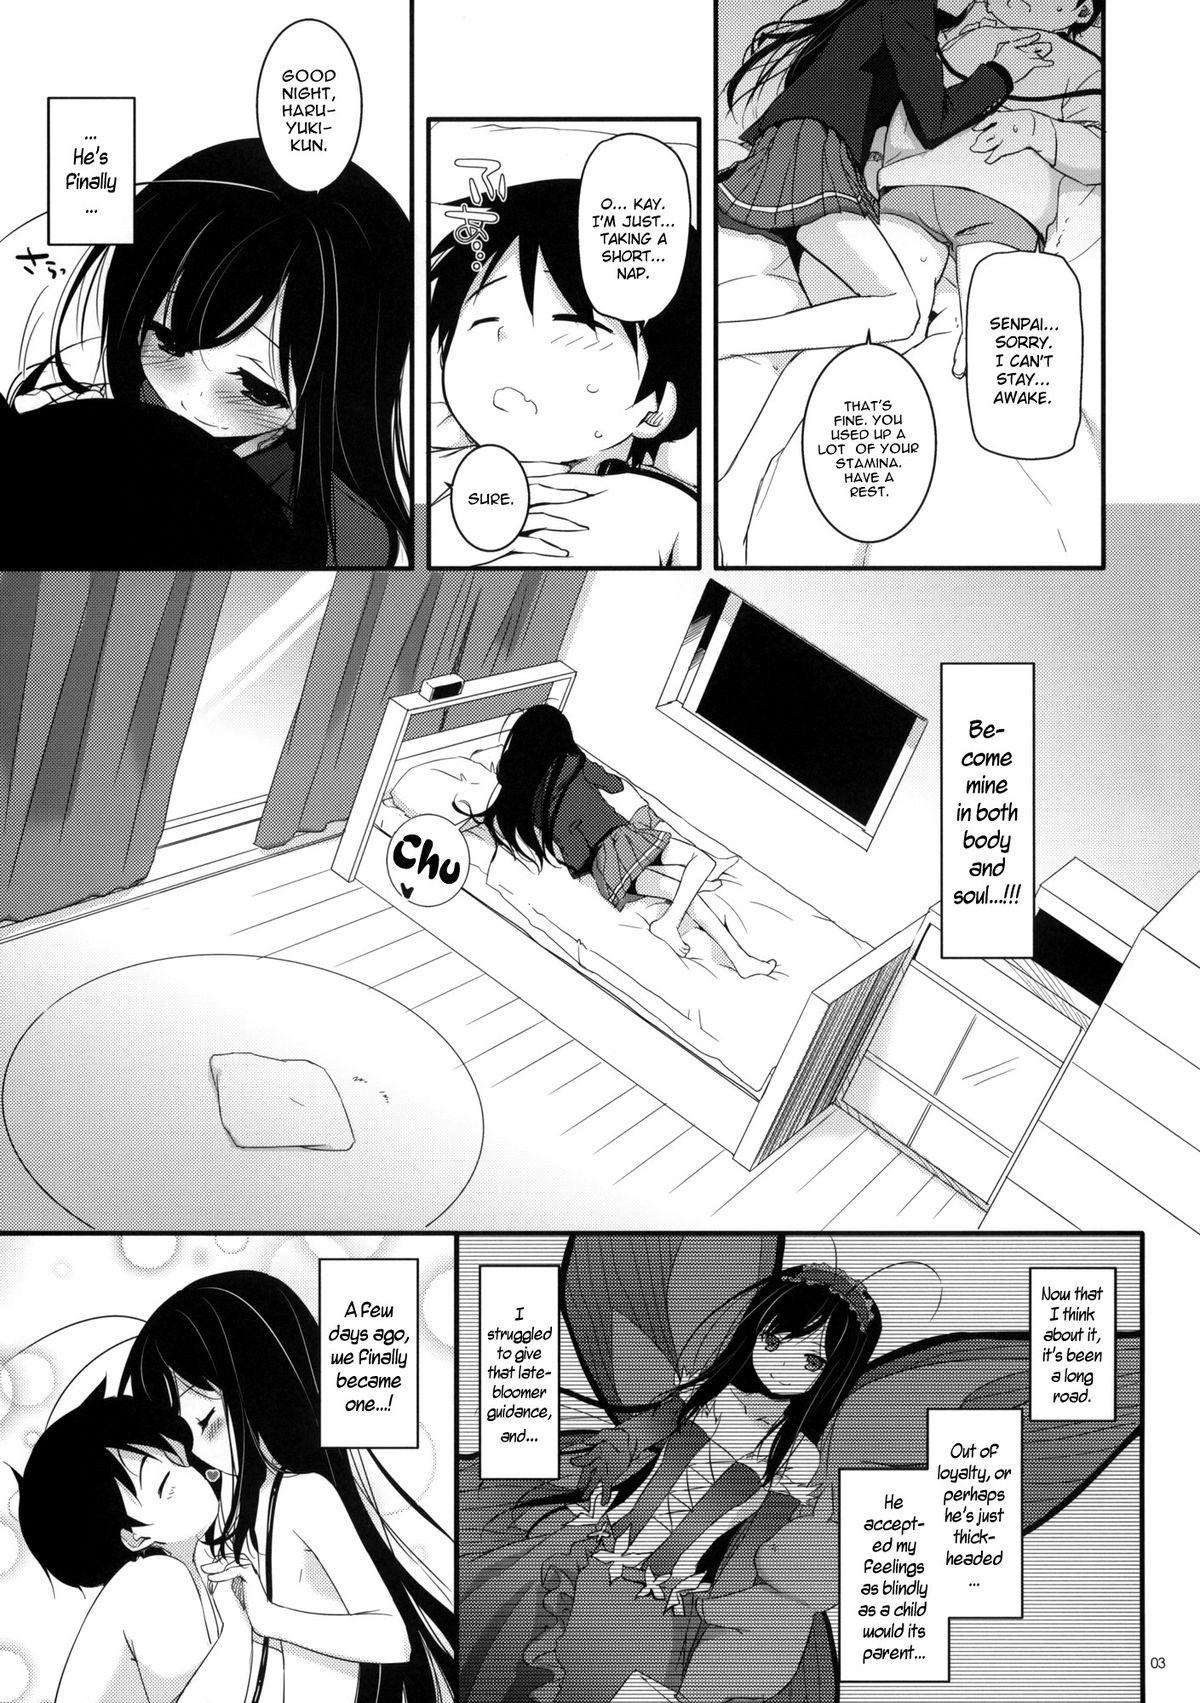 Spy Camera D.L. action 68 - Accel world Twink - Page 2